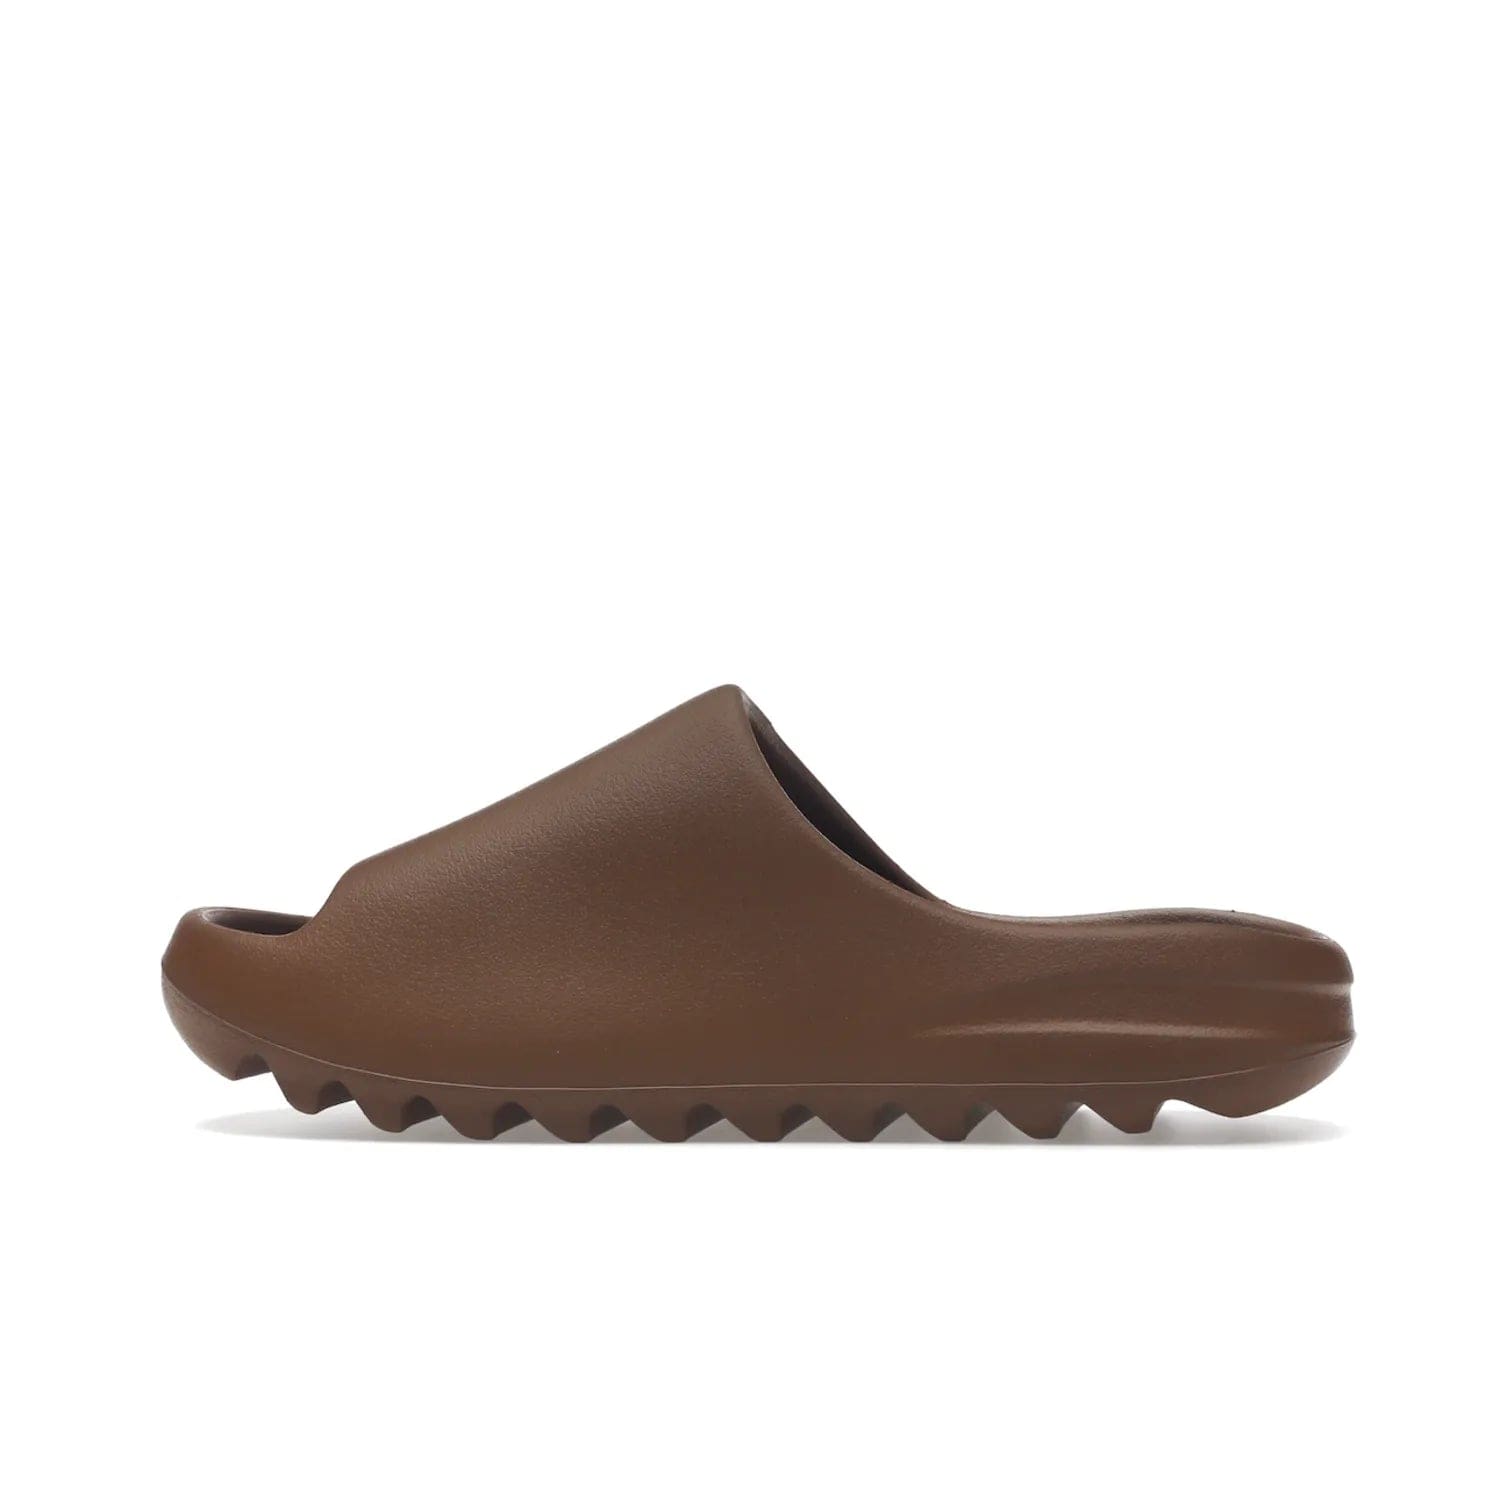 adidas Yeezy Slide Flax - Image 20 - Only at www.BallersClubKickz.com - Score the perfect casual look with the adidas Yeezy Slide Flax. Made with lightweight injected EVA plus horizontal grooves underfoot for traction. Release on August 22, 2022. $70.